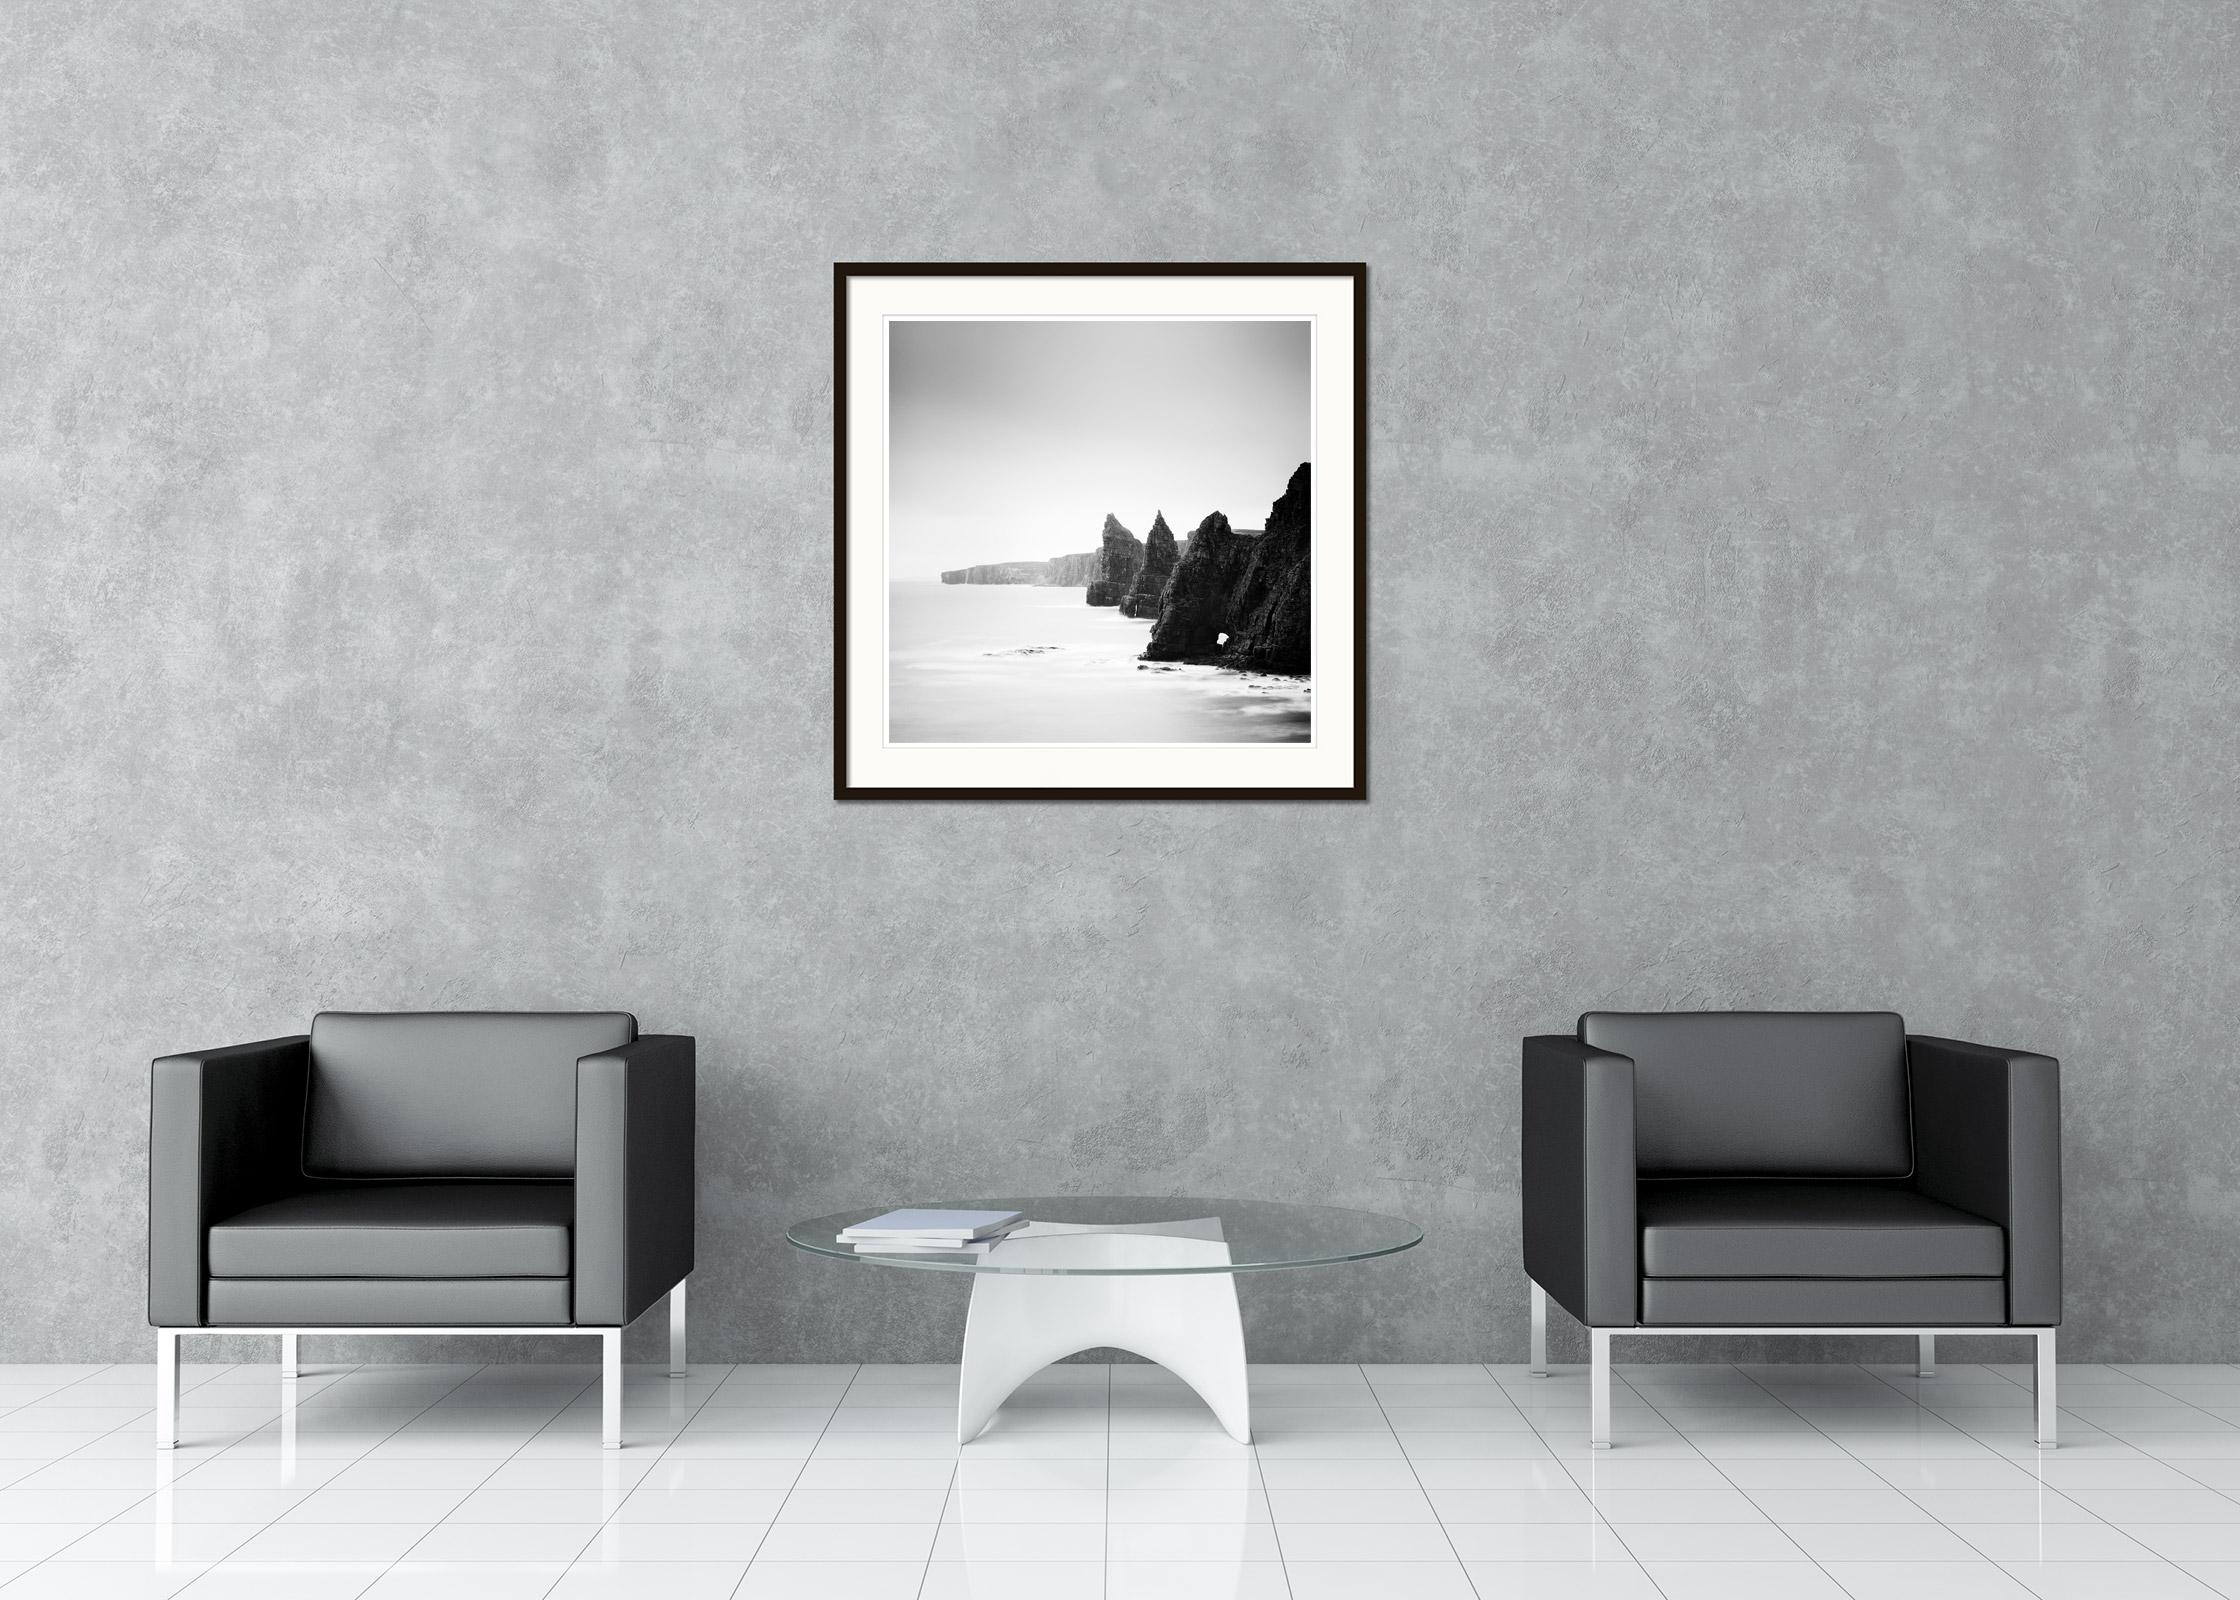 Black and White Fine Art landscape photography - Duncansby Stacks - Scotland wild coasts with the unique cliffs. Archival pigment ink print, edition of 9. Signed, titled, dated and numbered by artist. Certificate of authenticity included. Printed